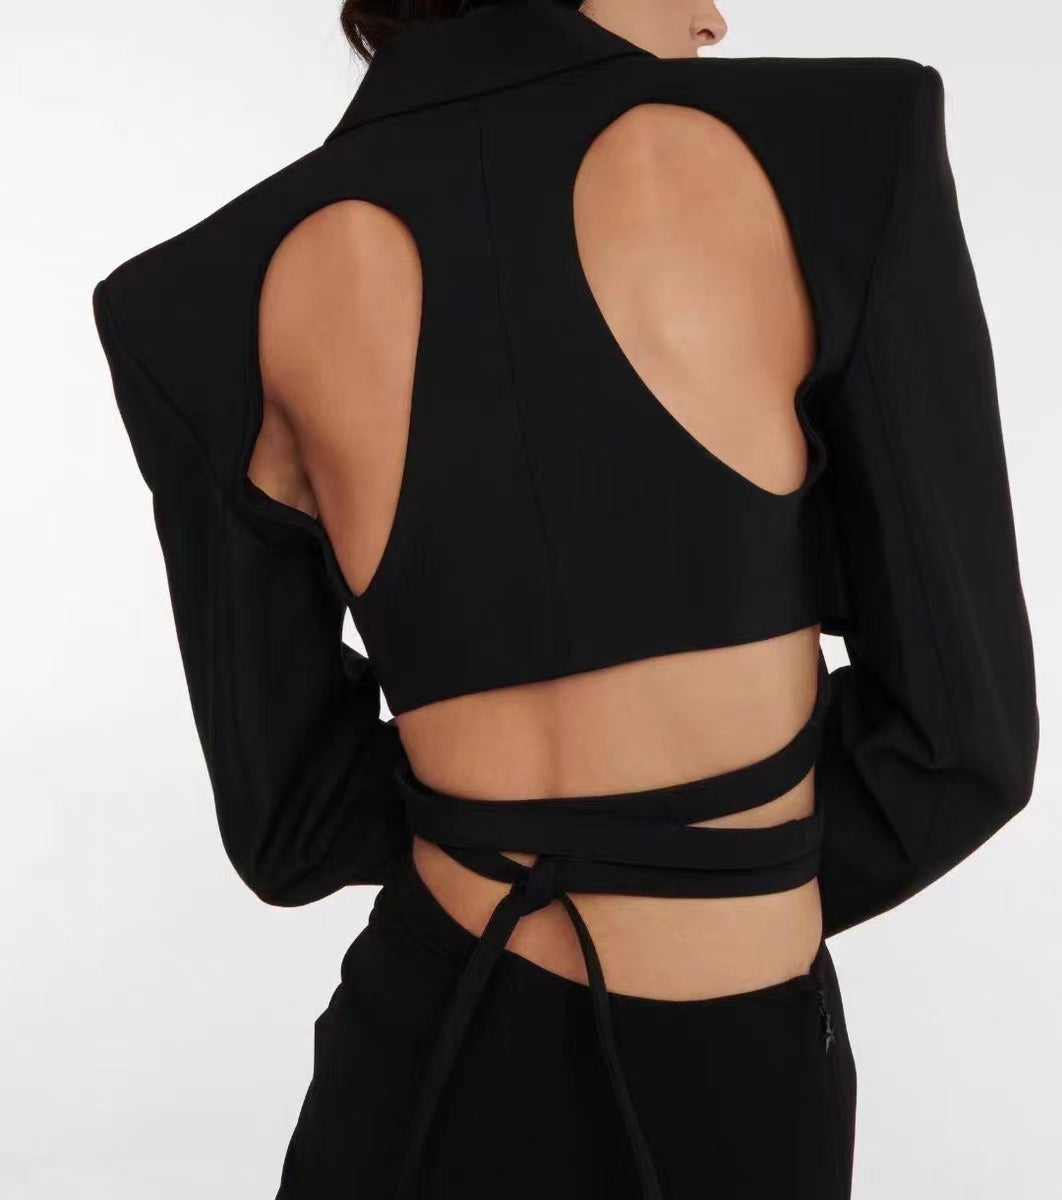 High-Grade Black Suit Coat: Modern Street Style, Cutout Backless Waist, Spicy Girl Vibes, Photo Texture